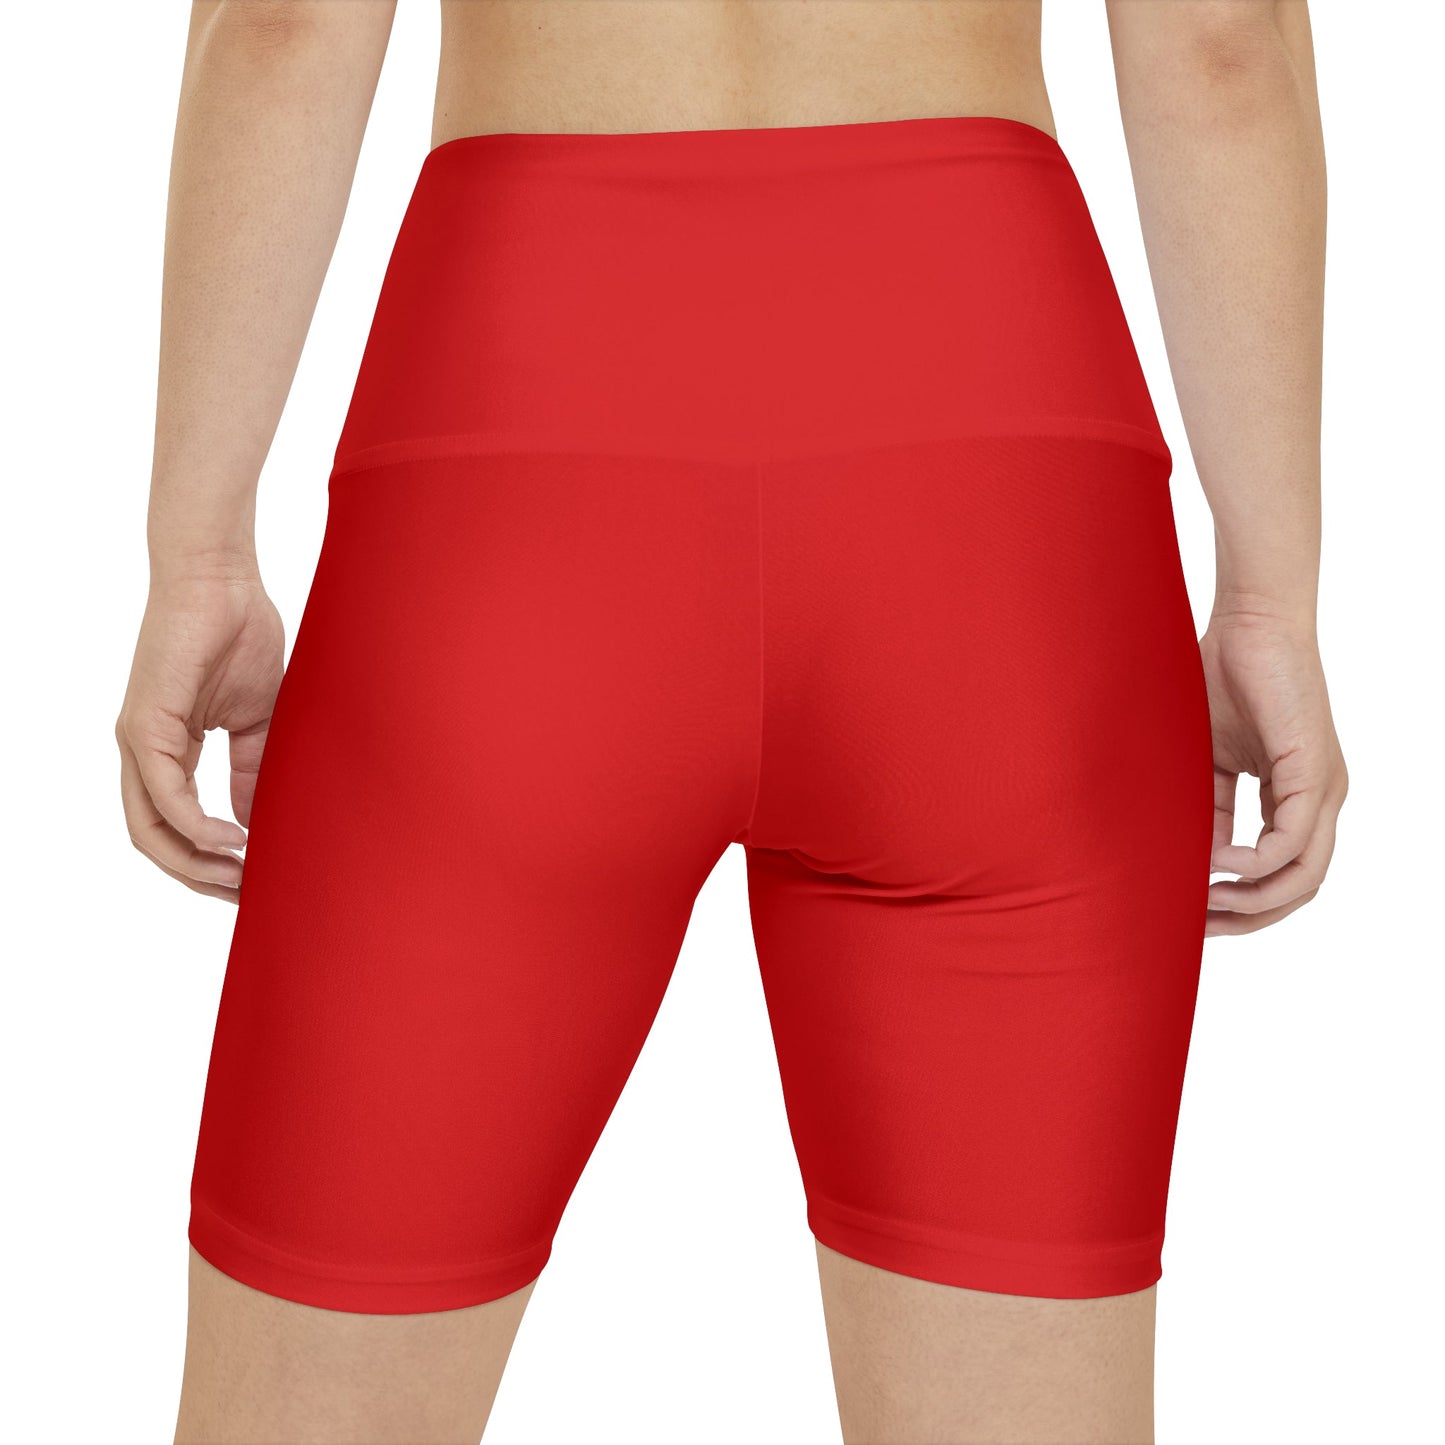 The Man Women's Workout Shorts active styleactive wearActivewear#tag4##tag5##tag6#